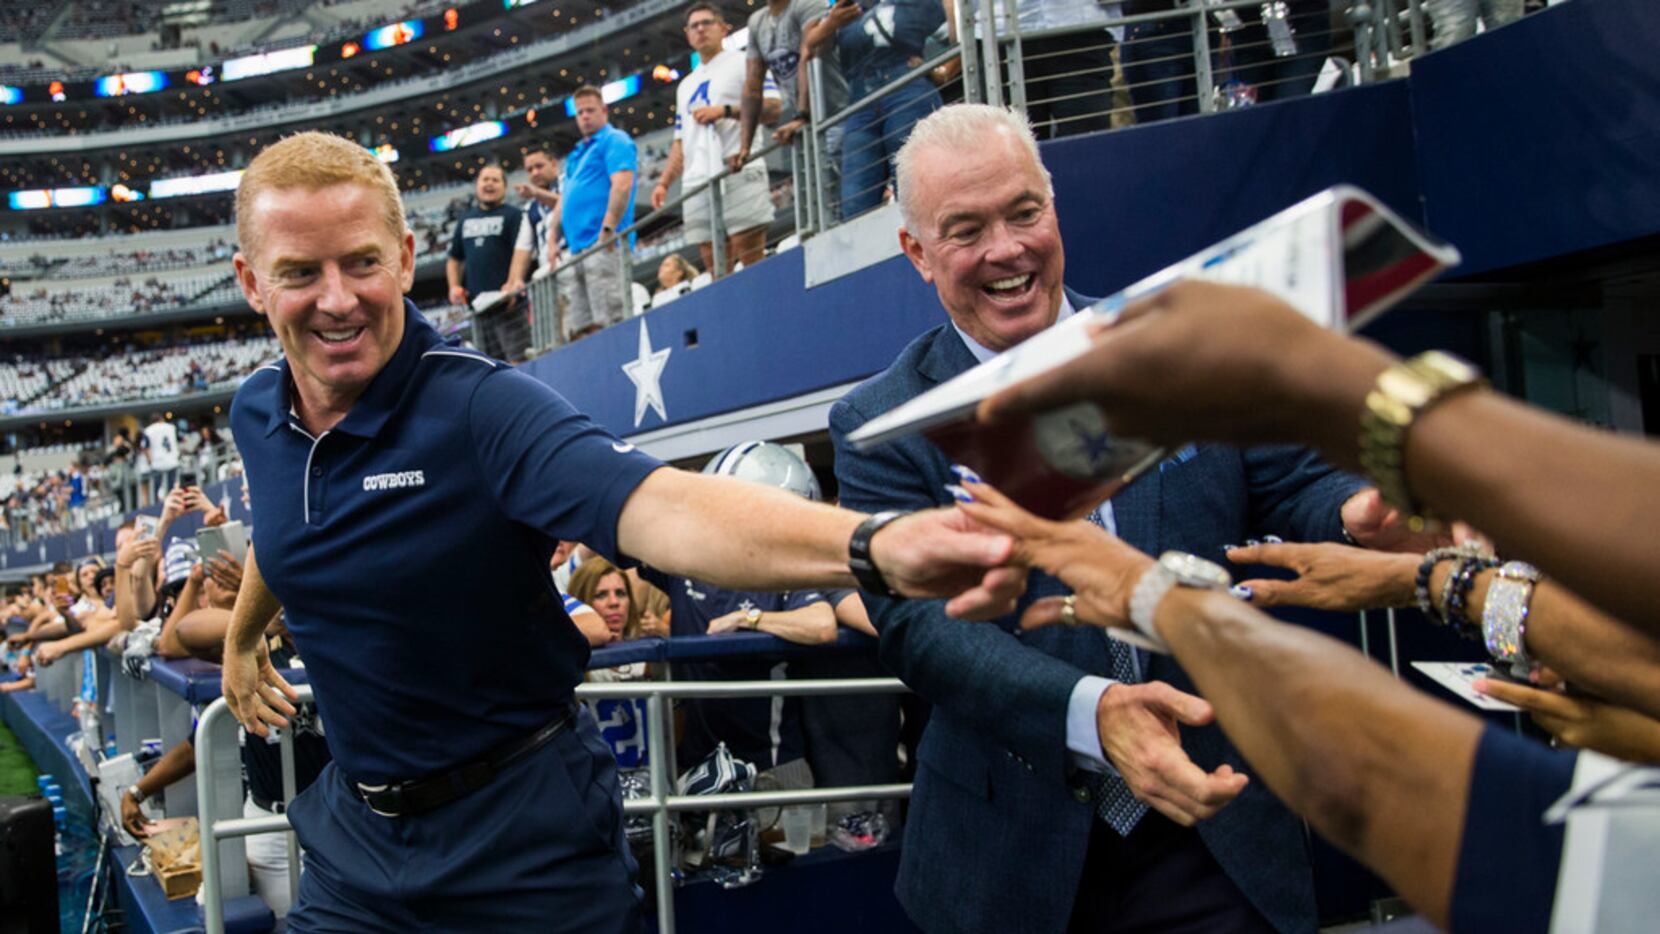 The New York Giants are happy to have Jason Garrett on staff: 'He's been a  great resource for us'